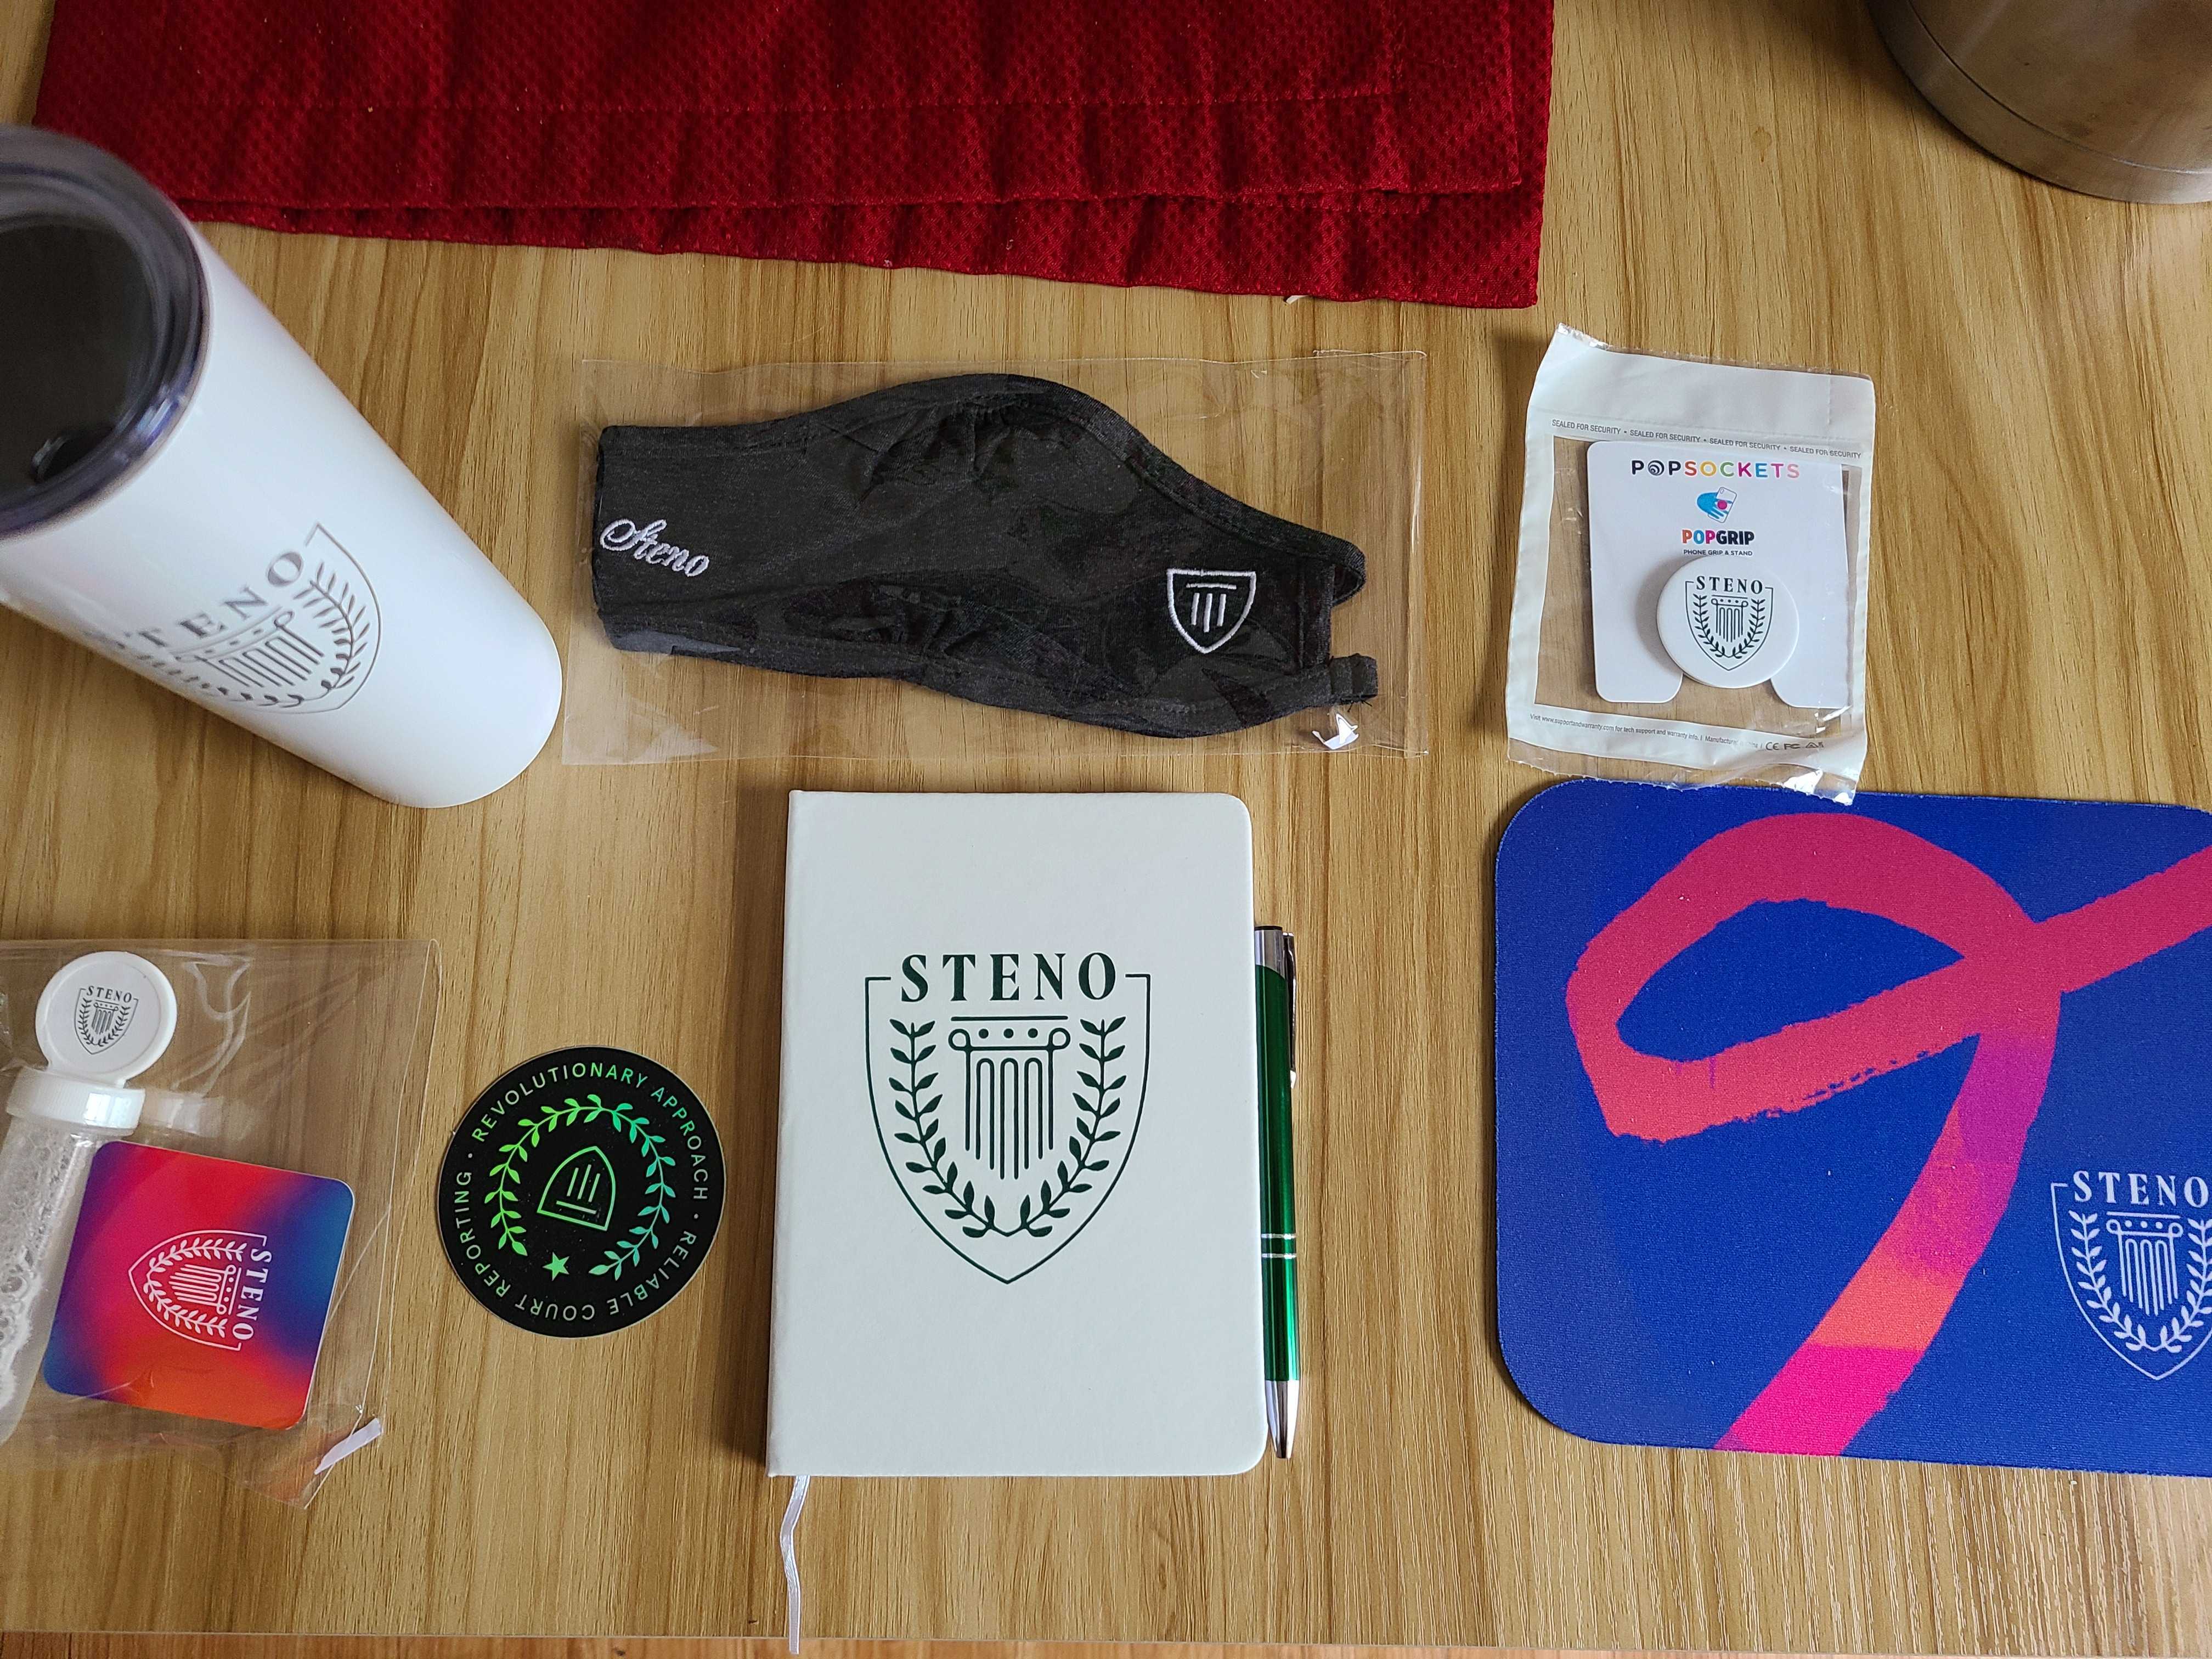 Looking down at a desk containing Steno swag items: travel cup, notebook, mask and more.